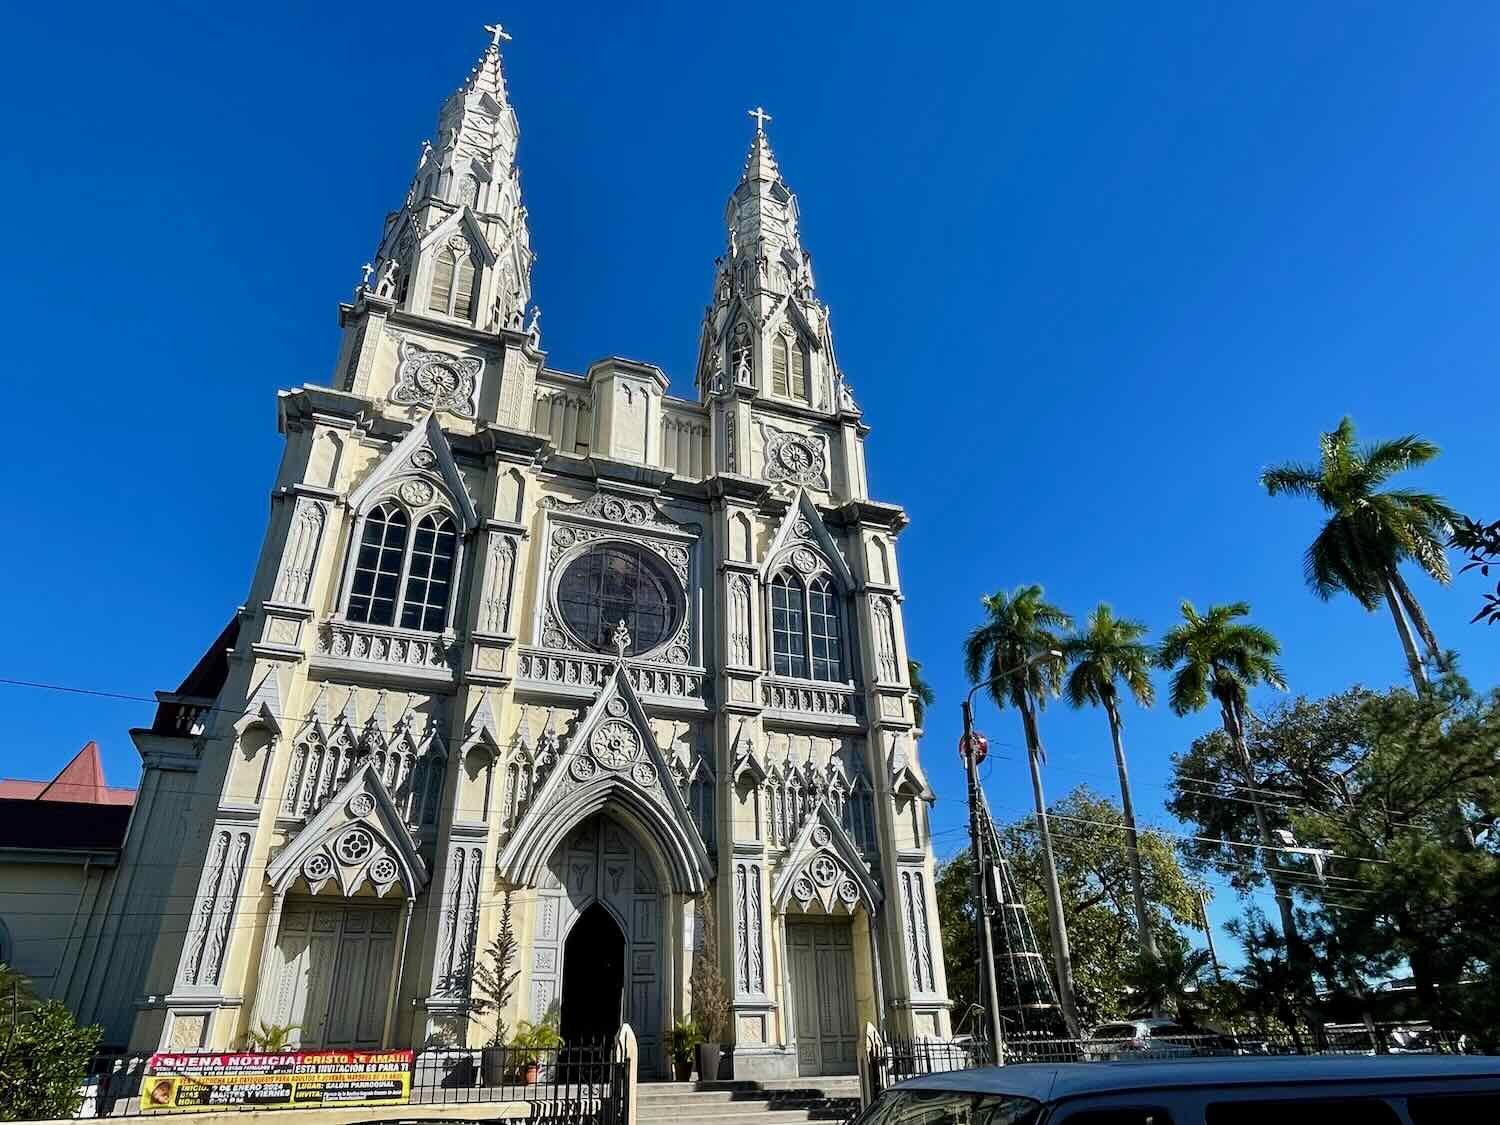 The Basilica of the Sacred Heart of Jesus has a beautifully ornate, baroque facade.